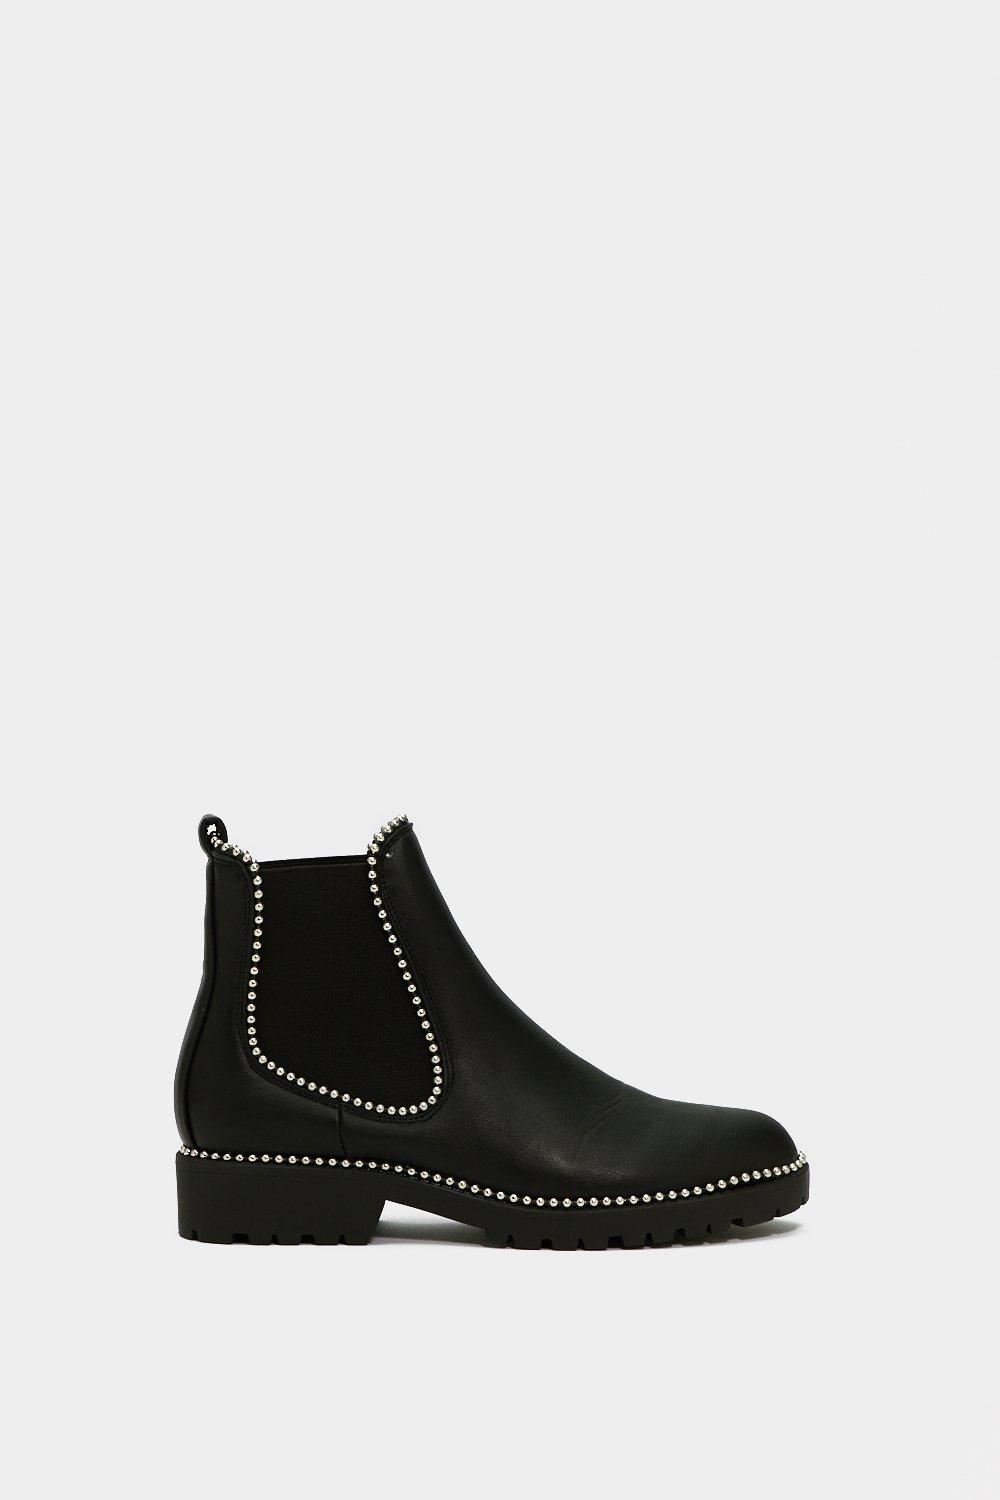 Studded Faux Leather Flat Chelsea Boots